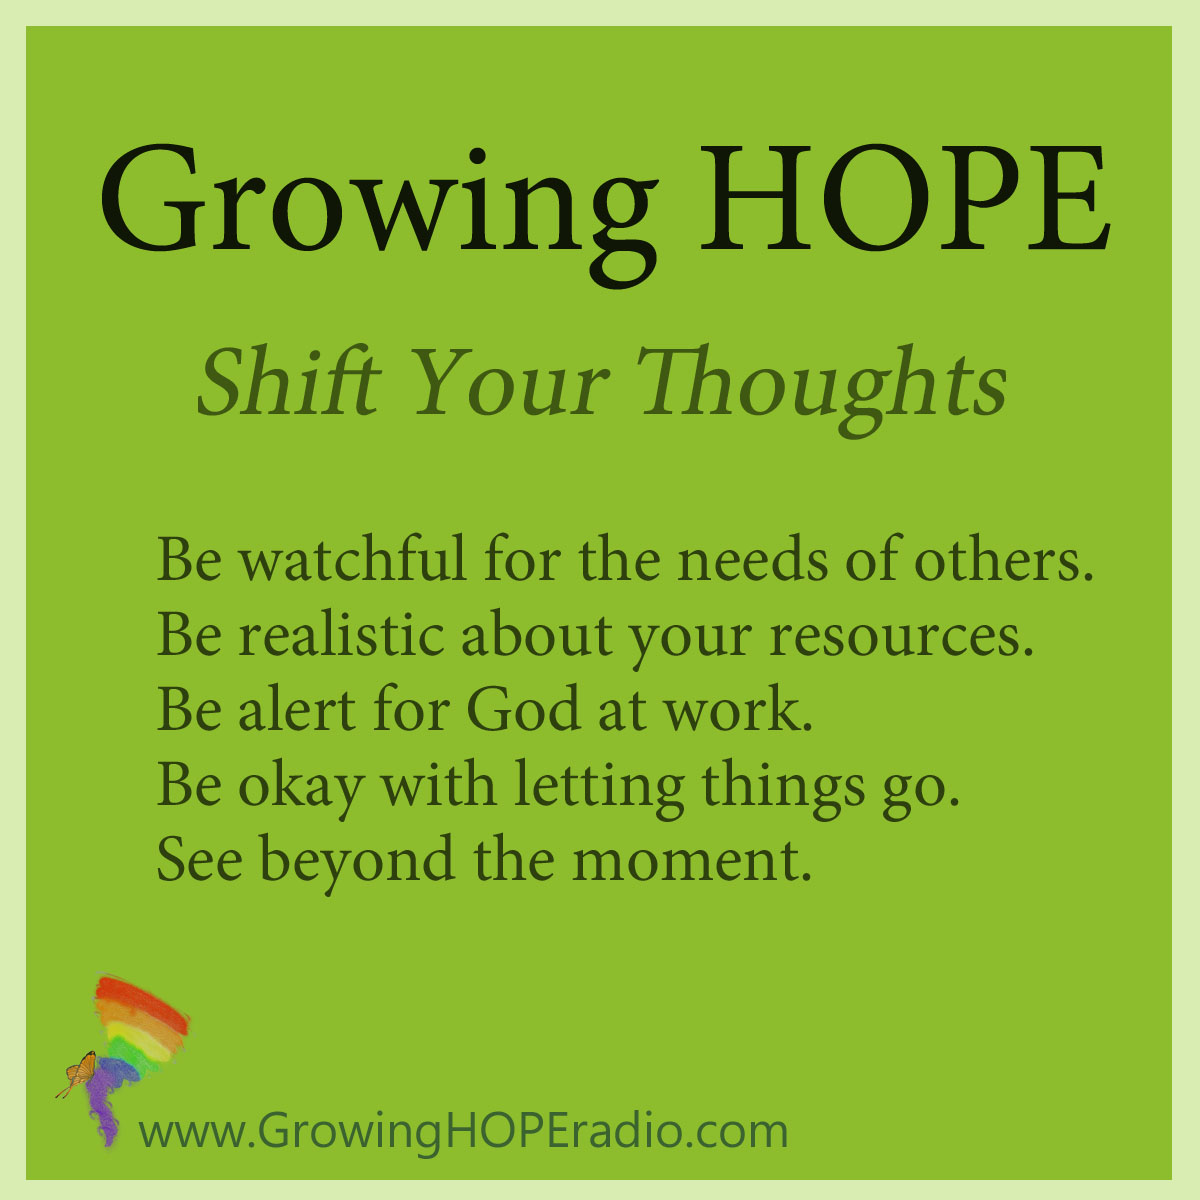 #GrowingHOPE daily - 5 points - shift the thoughts